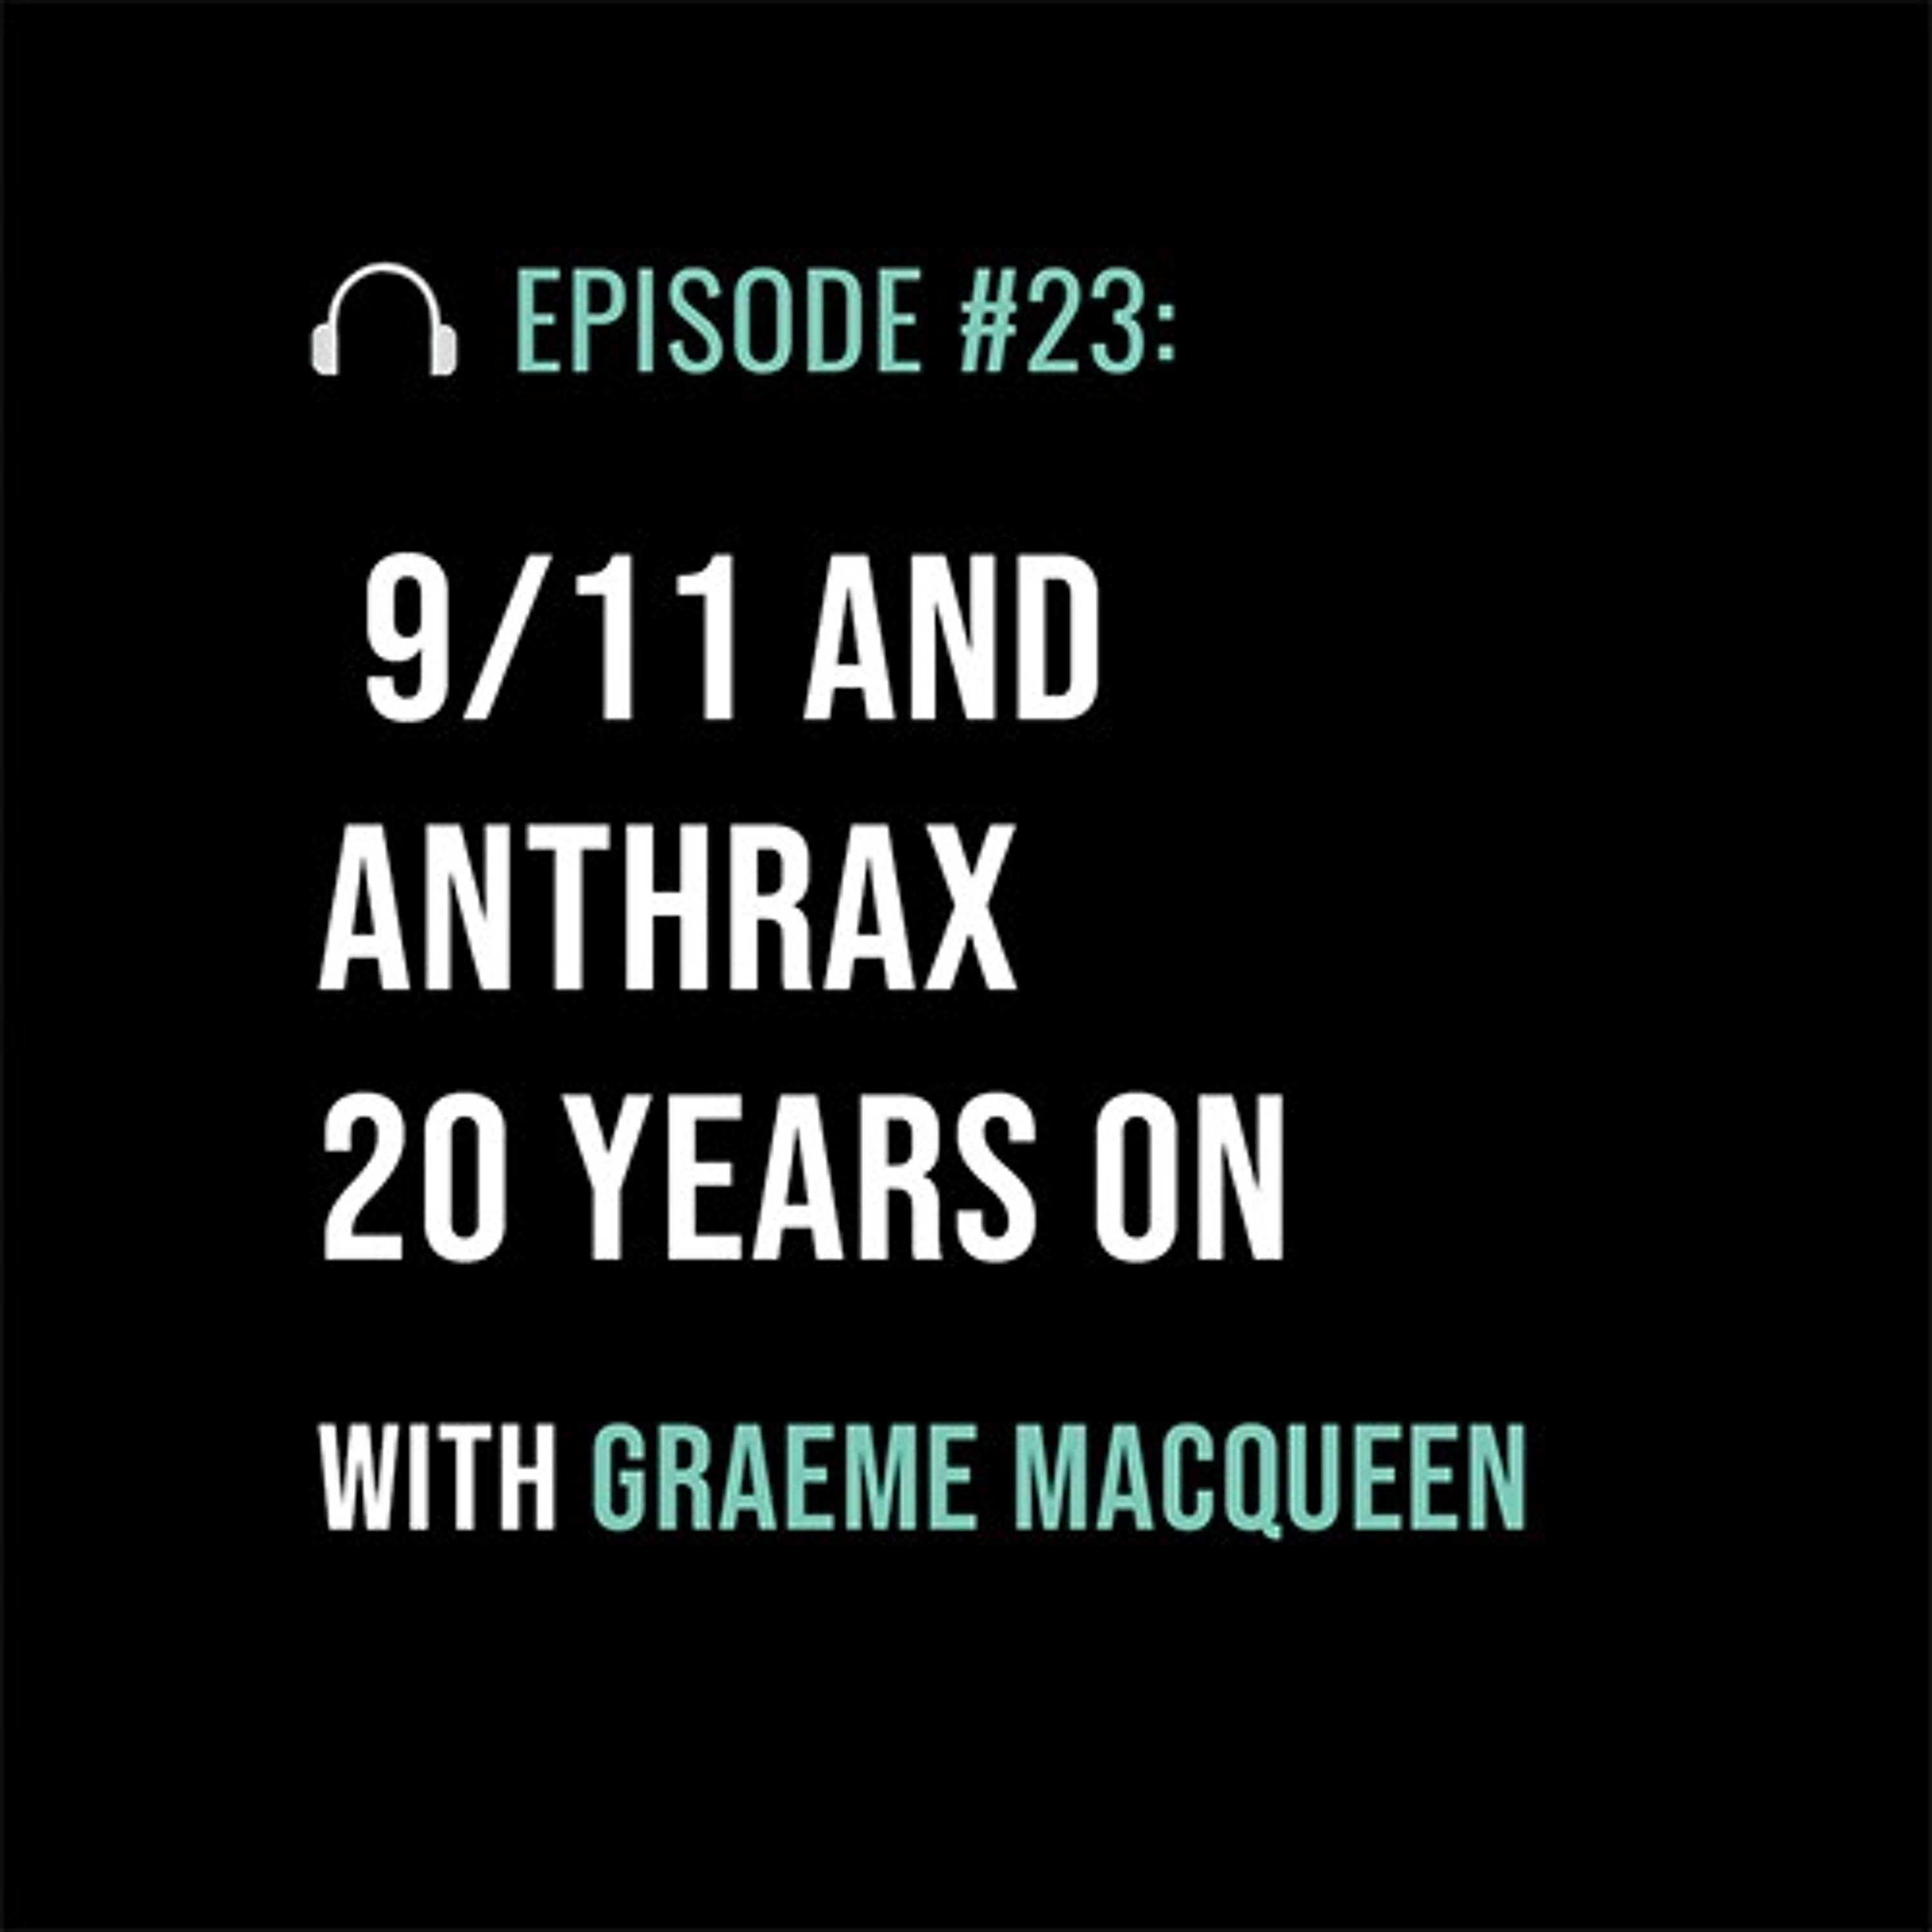 9/11 and Anthrax 20 Years On with Graeme MacQueen